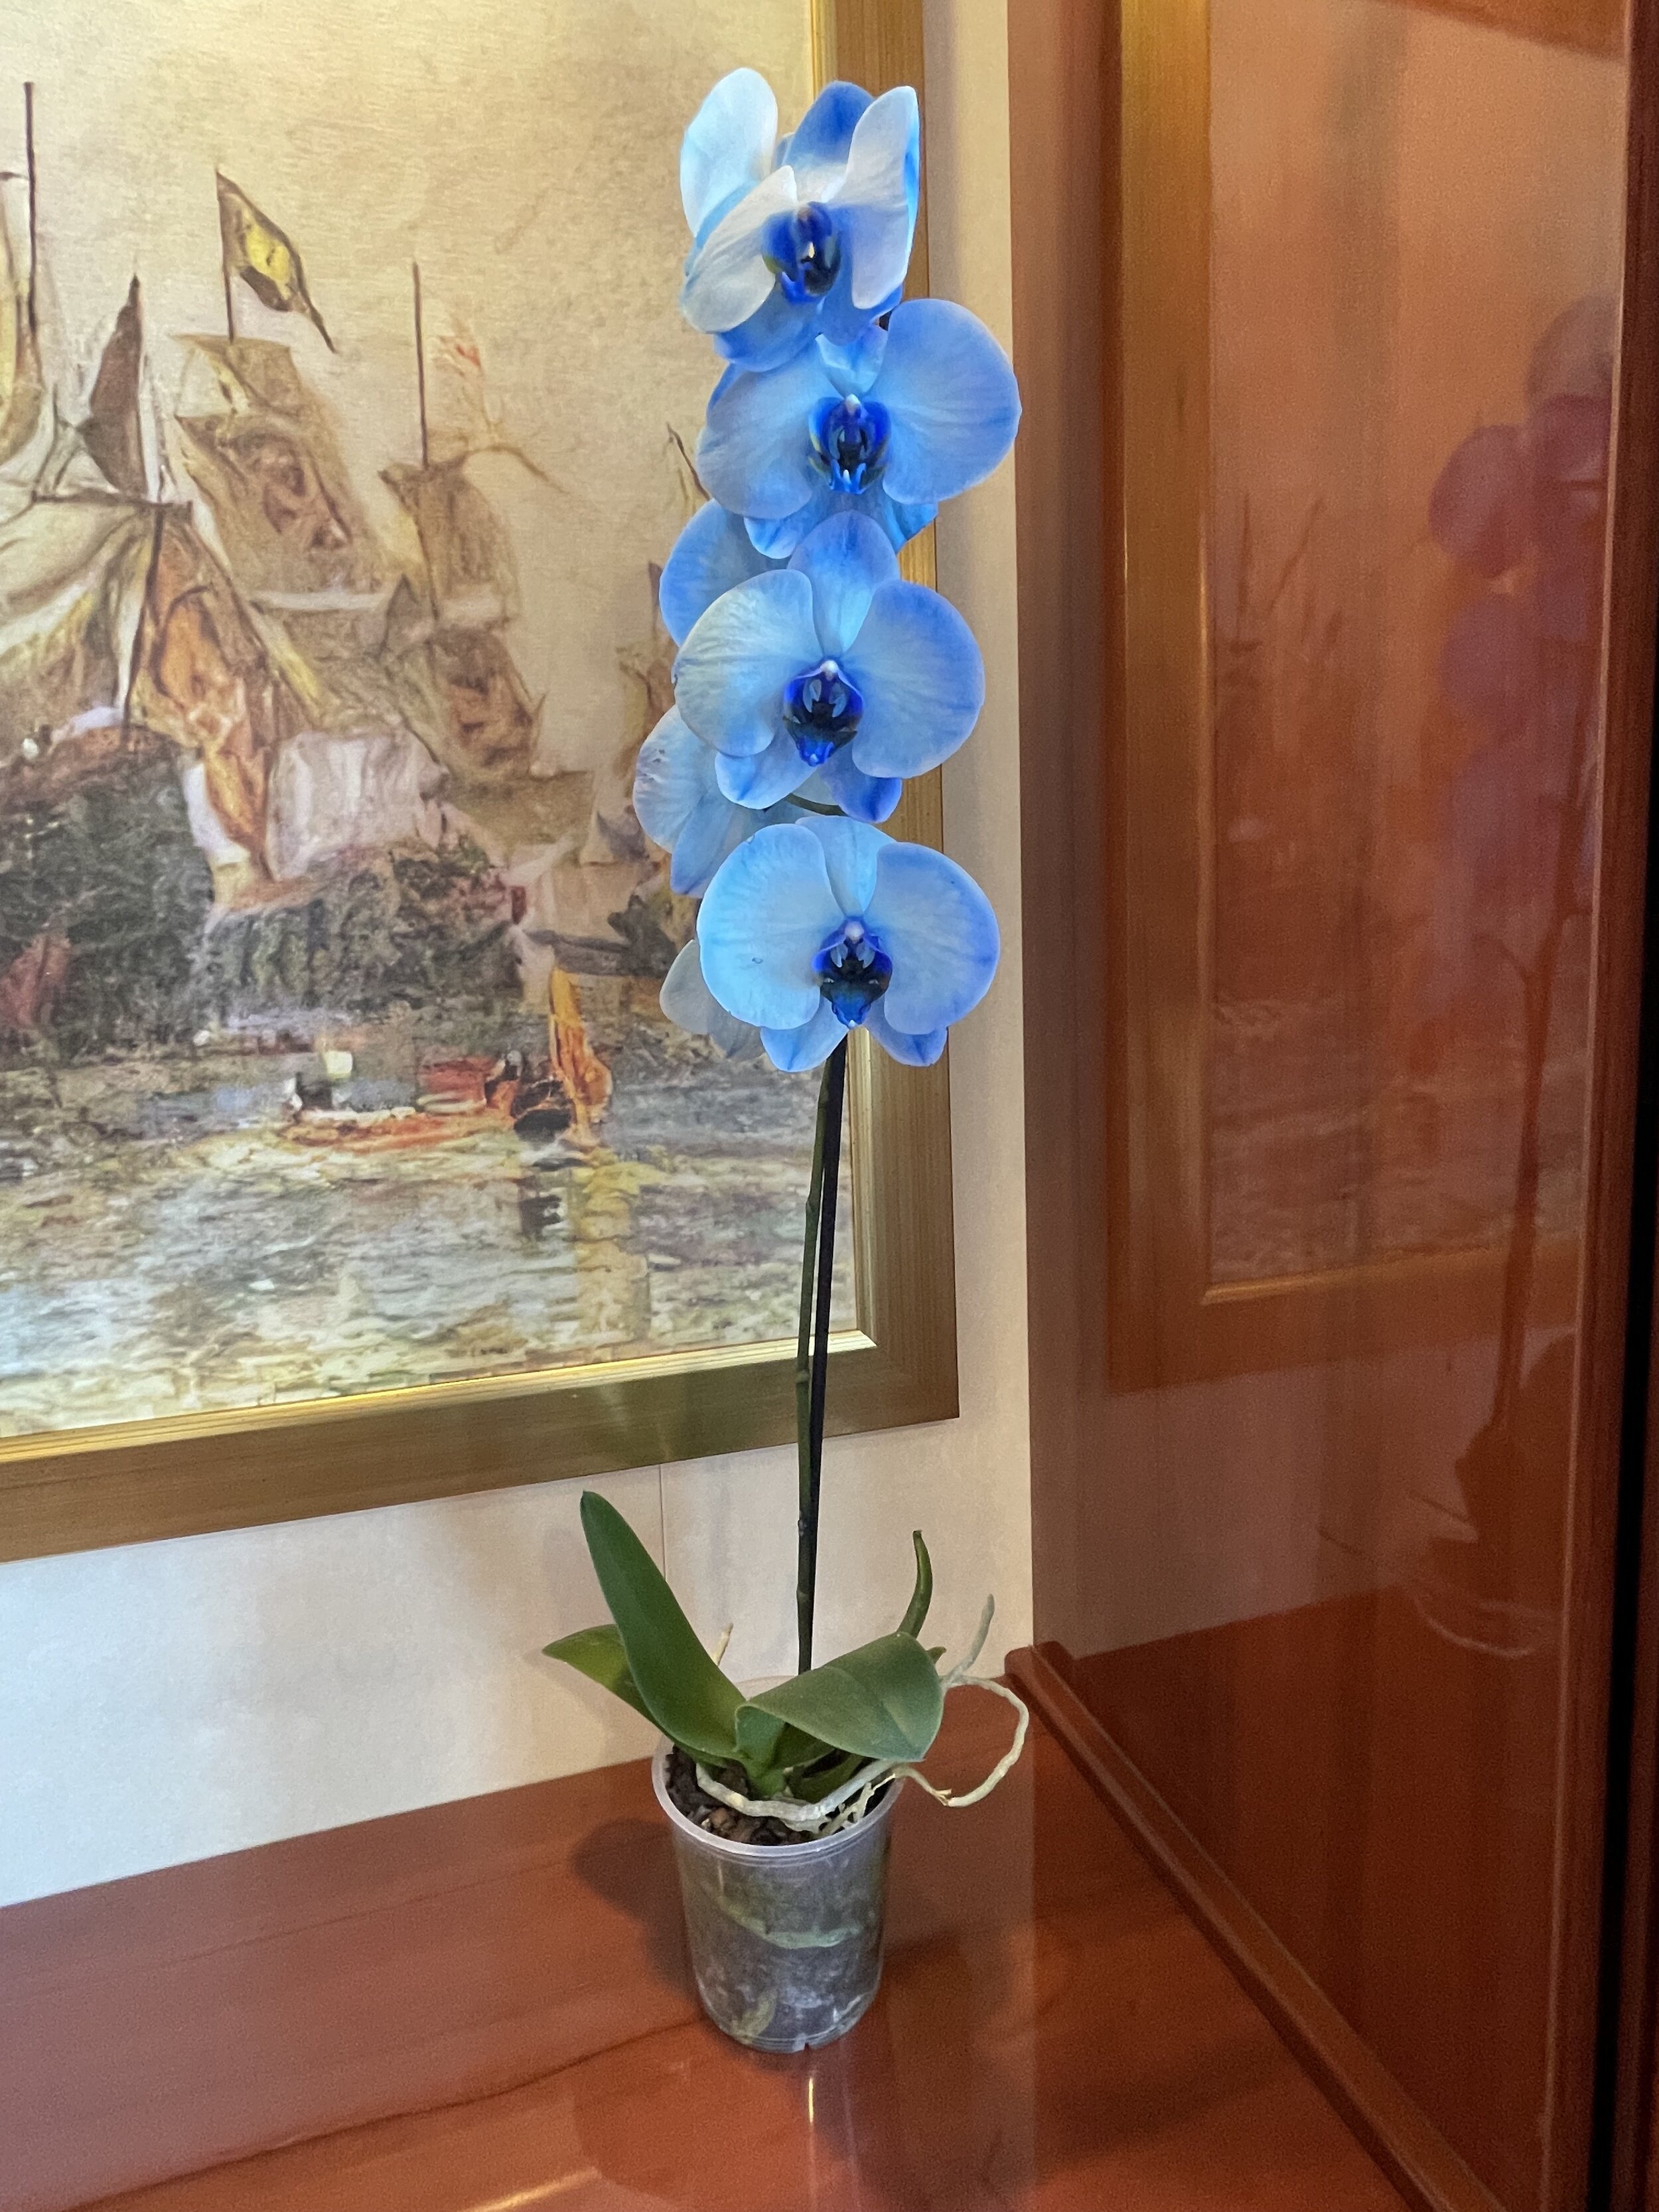  A beautiful orchid placed in our room 